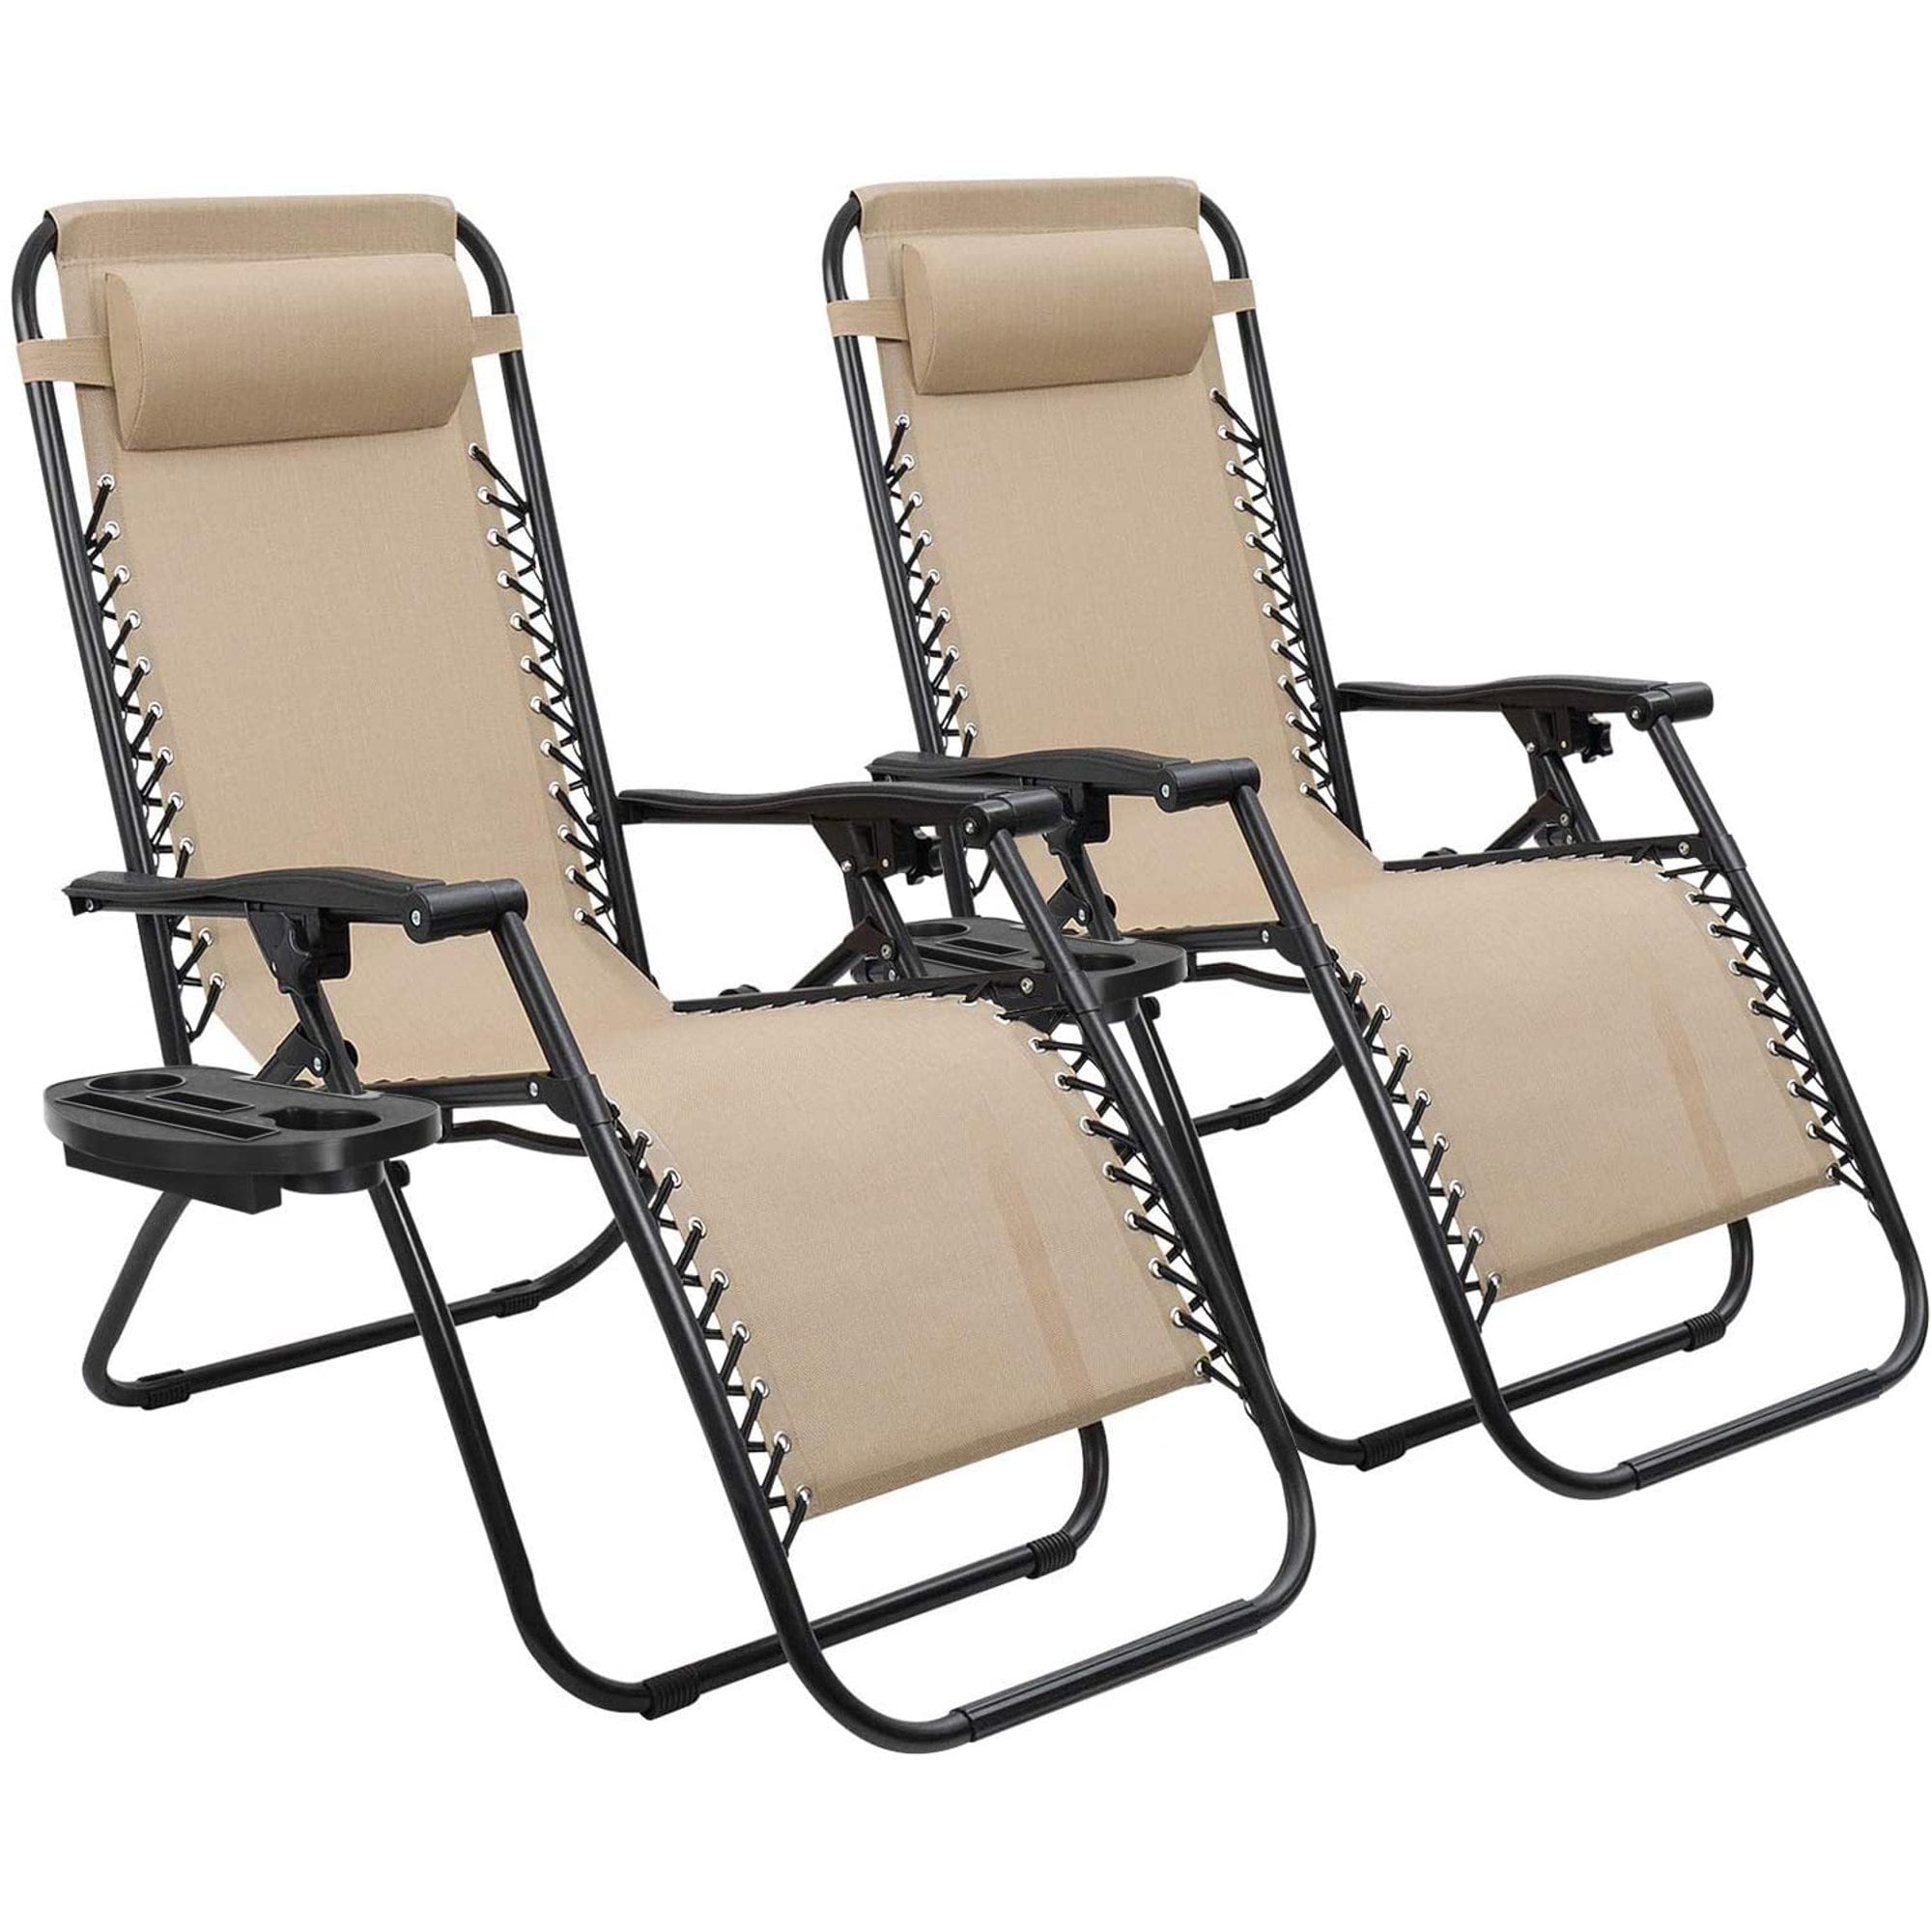 2 Patio Zero Gravity Lounge Chairs For Outdoor Leisure With Adjustable Pillows